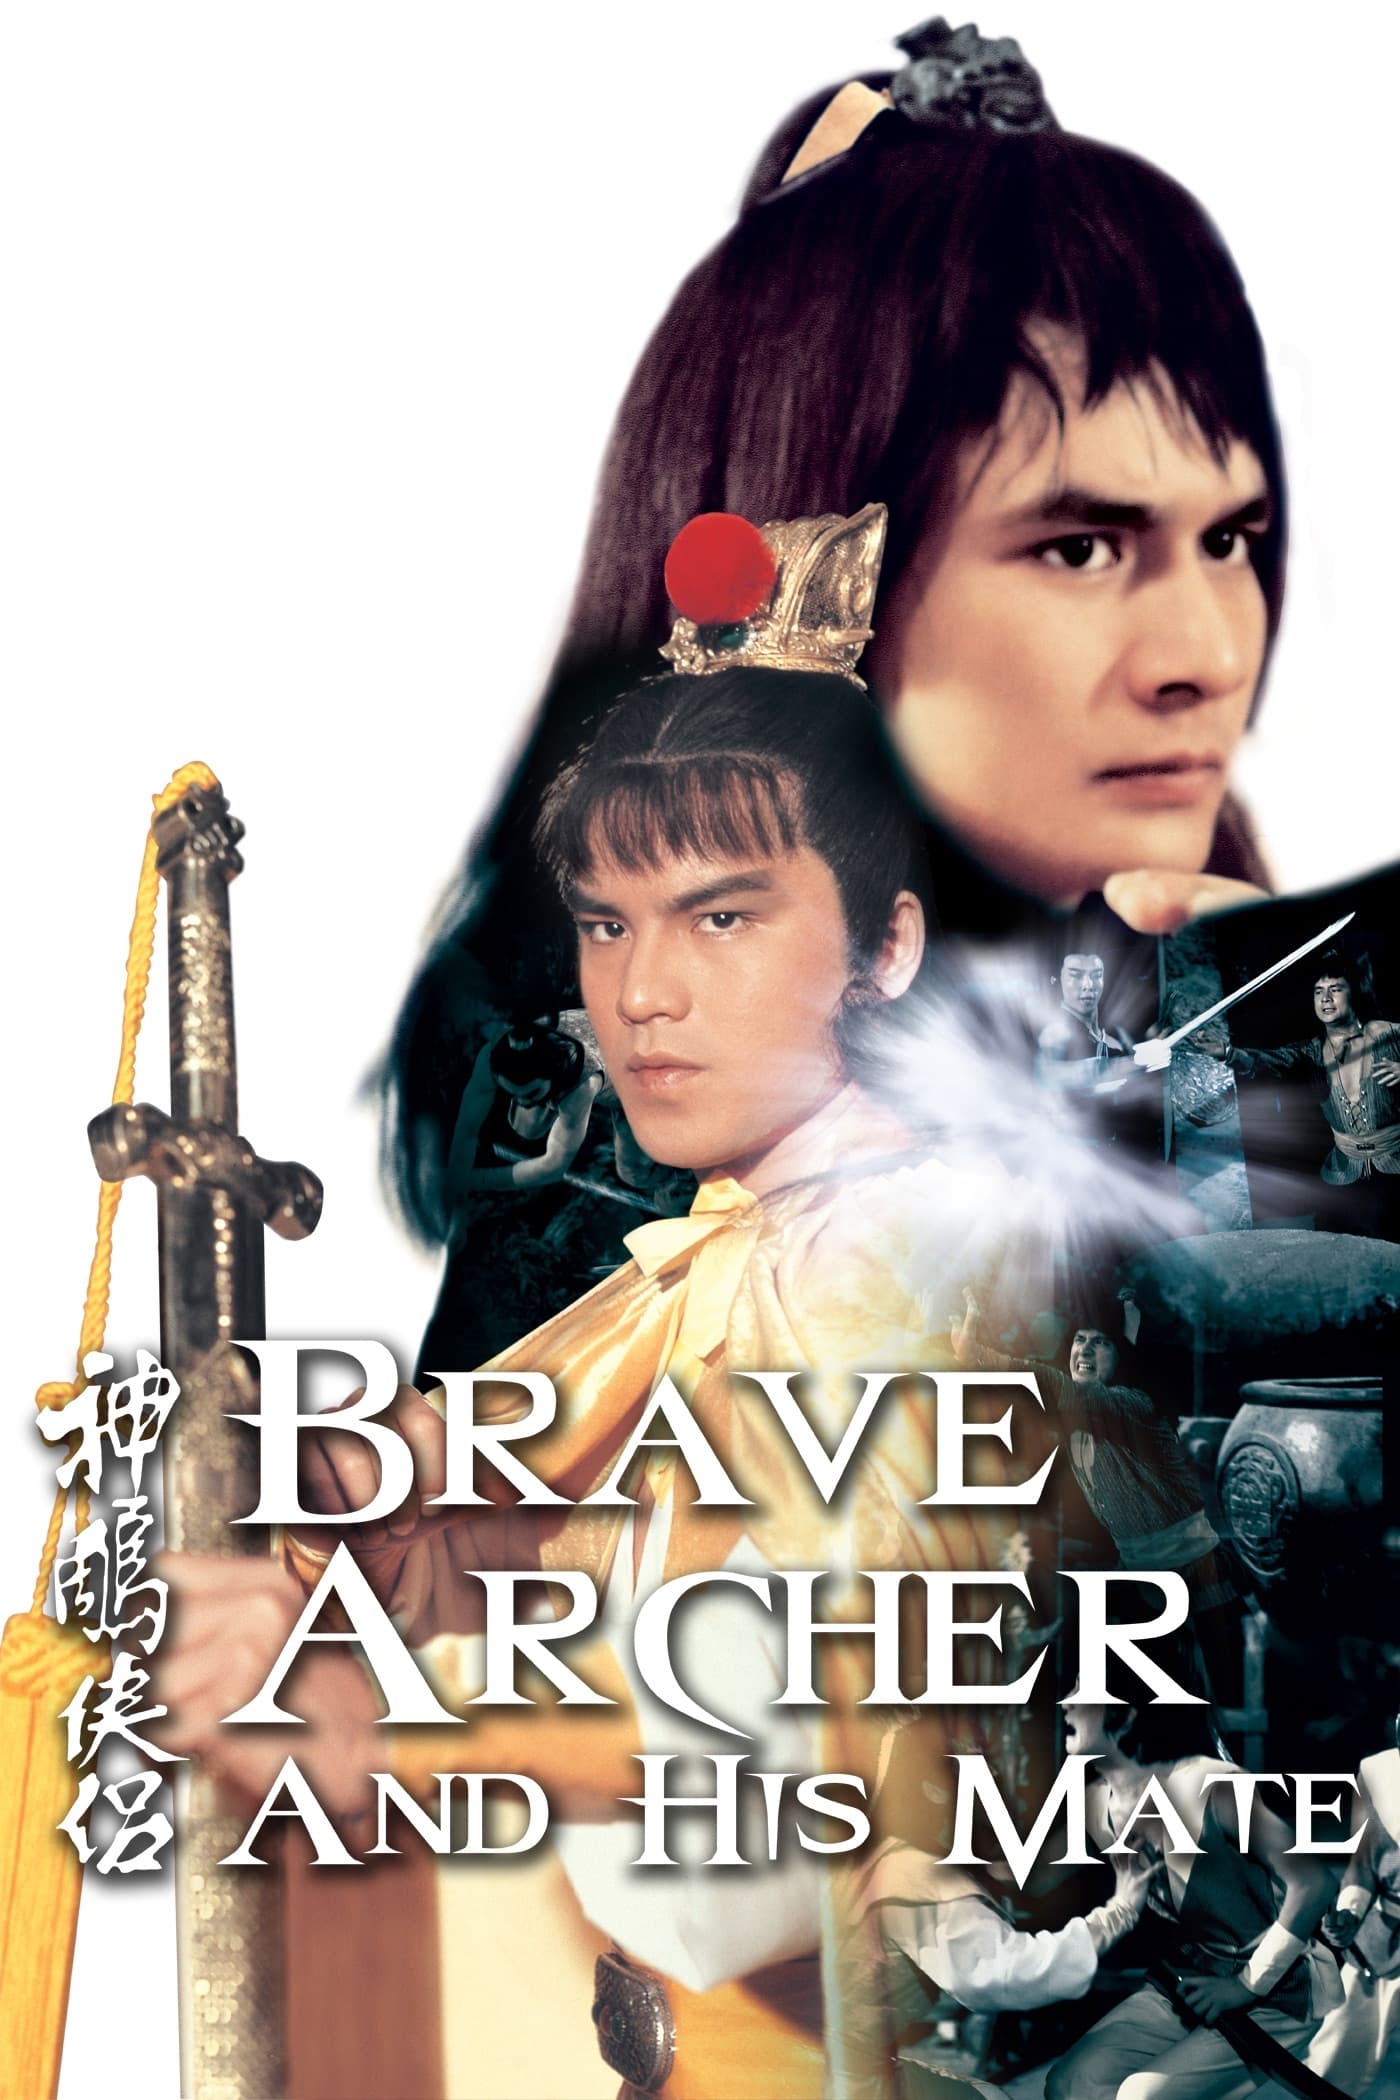 The Brave Archer and His Mate